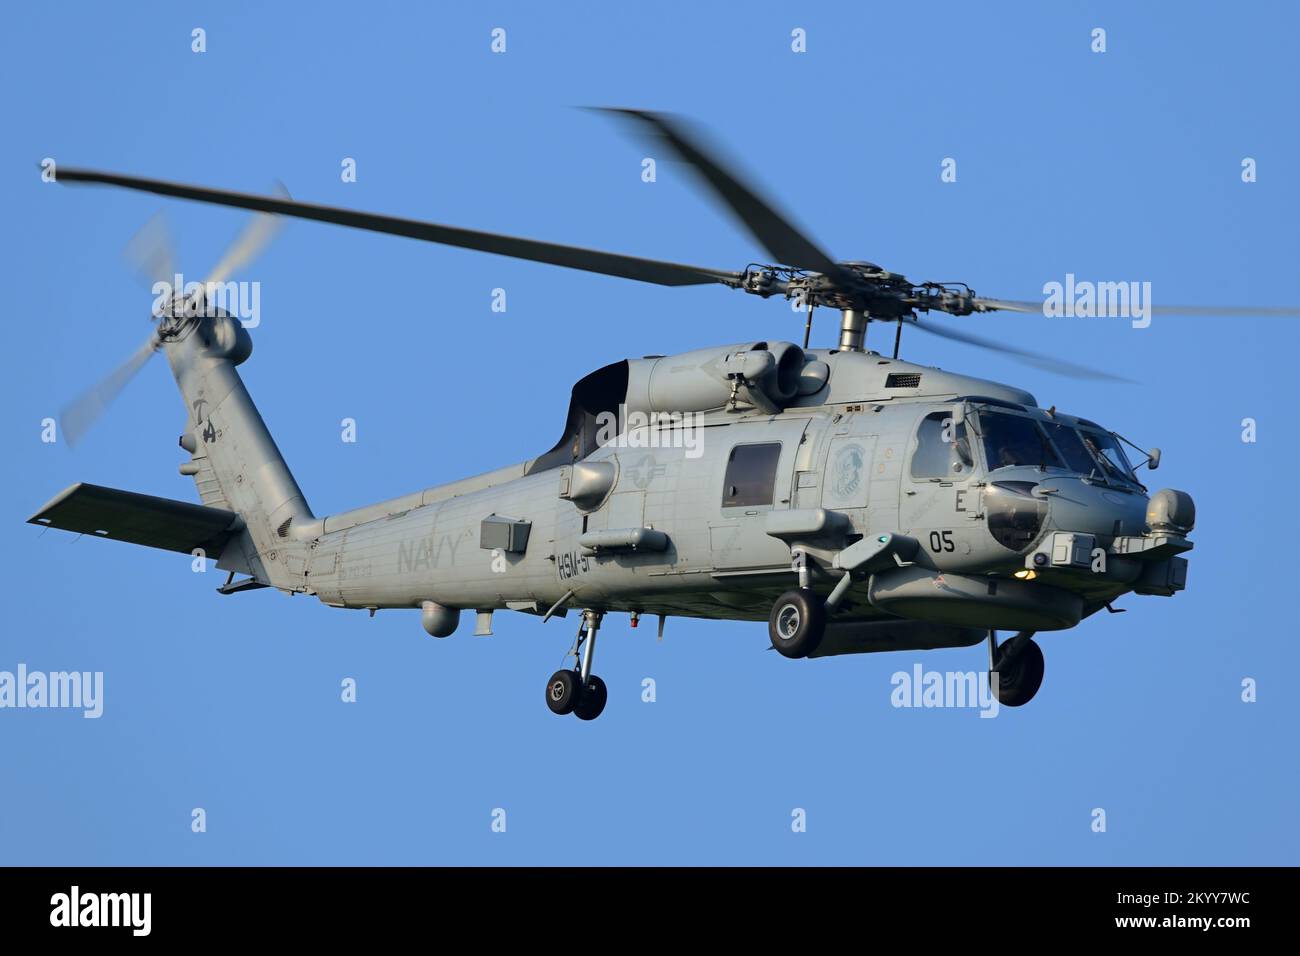 Kanagawa Prefecture, Japan - July 15, 2014: United States Navy Sikorsky MH-60R Seahawk utility maritime helicopter from HSM-51 Warlords. Stock Photo